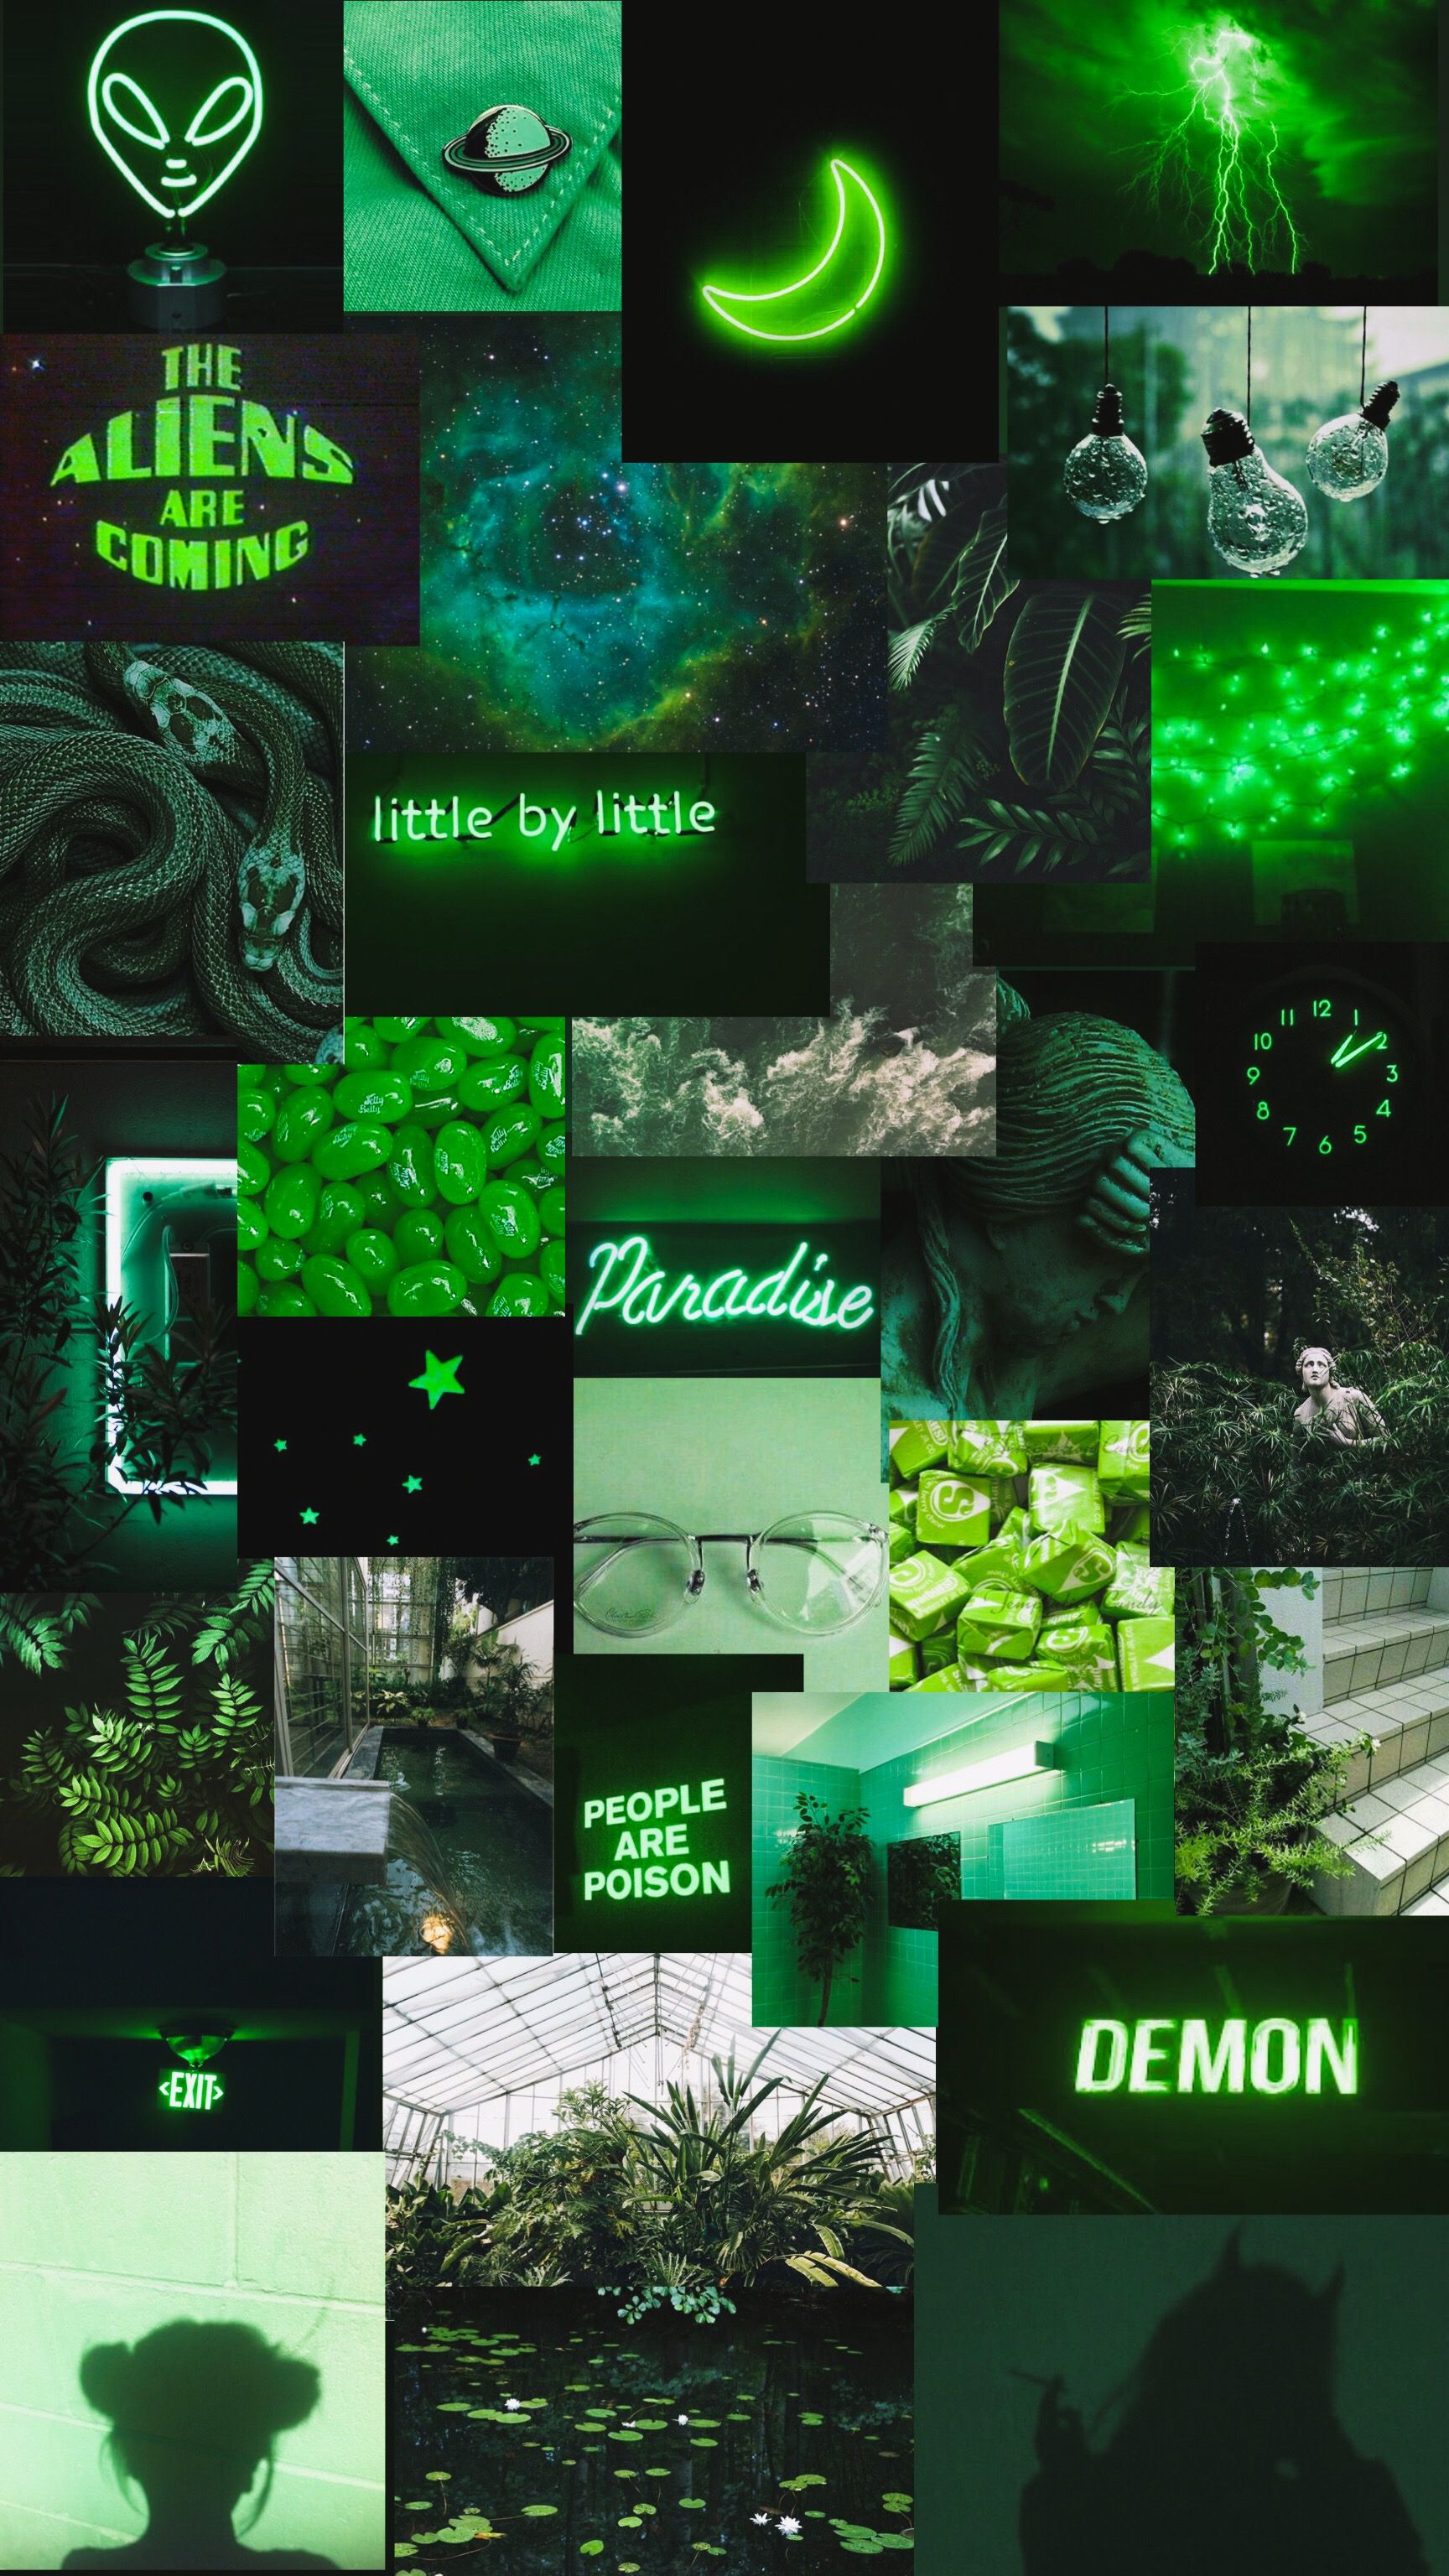 Pin By Joey On Collage Wallpaper. IPhone Wallpaper Green, Green Aesthetic Tumblr, Aesthetic Iphone Wallpaper